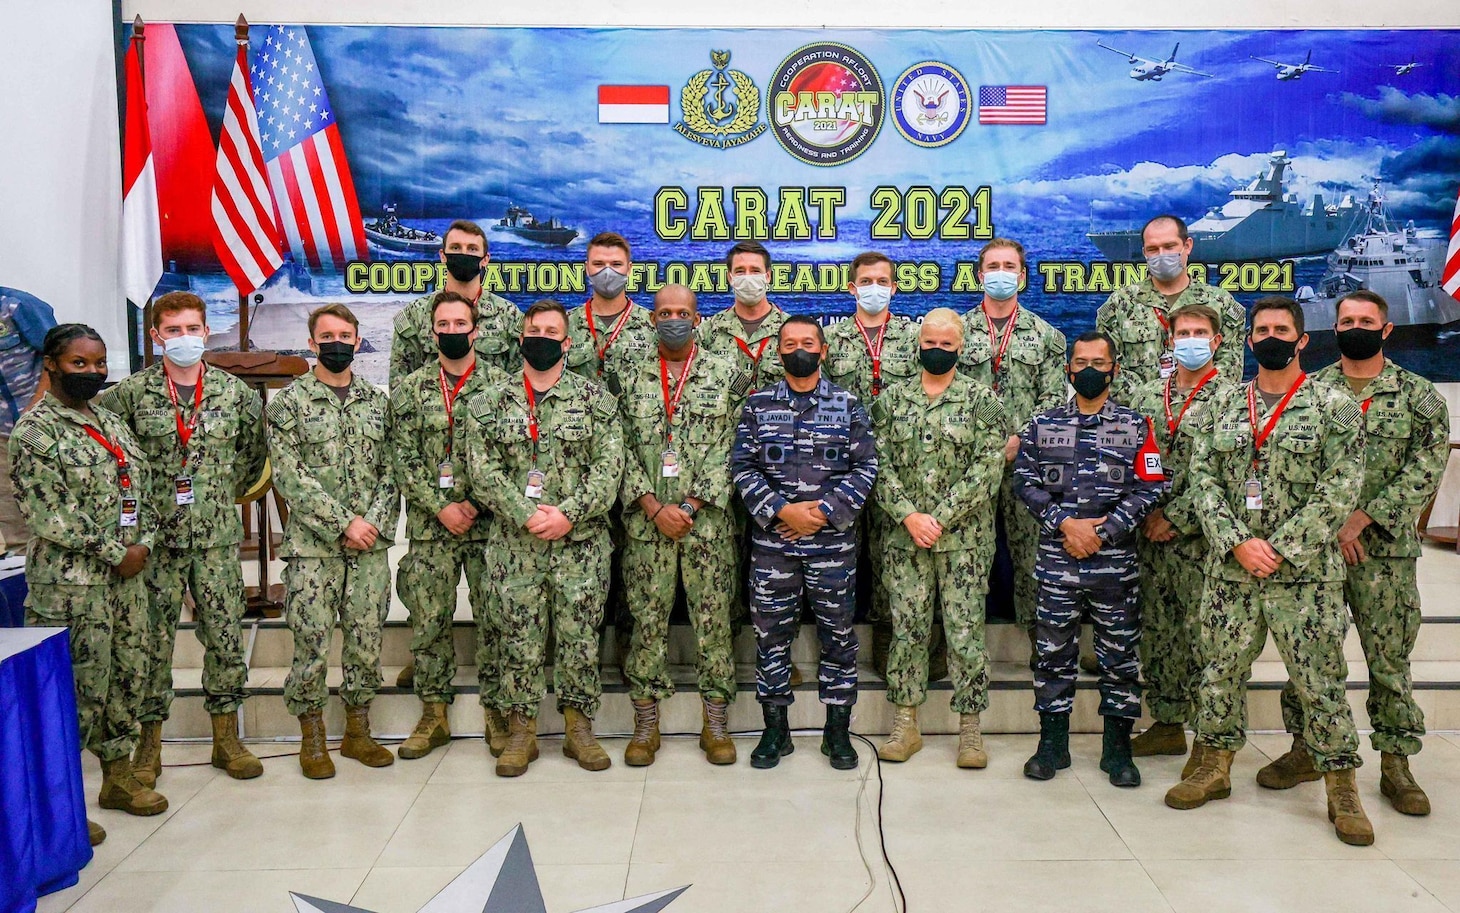 U.S. and Indonesian military personnel join during the opening ceremony for Cooperation Afloat and Readiness at Sea Training (CARAT) Indonesia 2021. In its 27th year, the CARAT series is comprised of multinational exercises, designed to enhance U.S. and partner navies’ abilities to operate together in response to traditional and non-traditional maritime security challenges in the Indo-Pacific region.